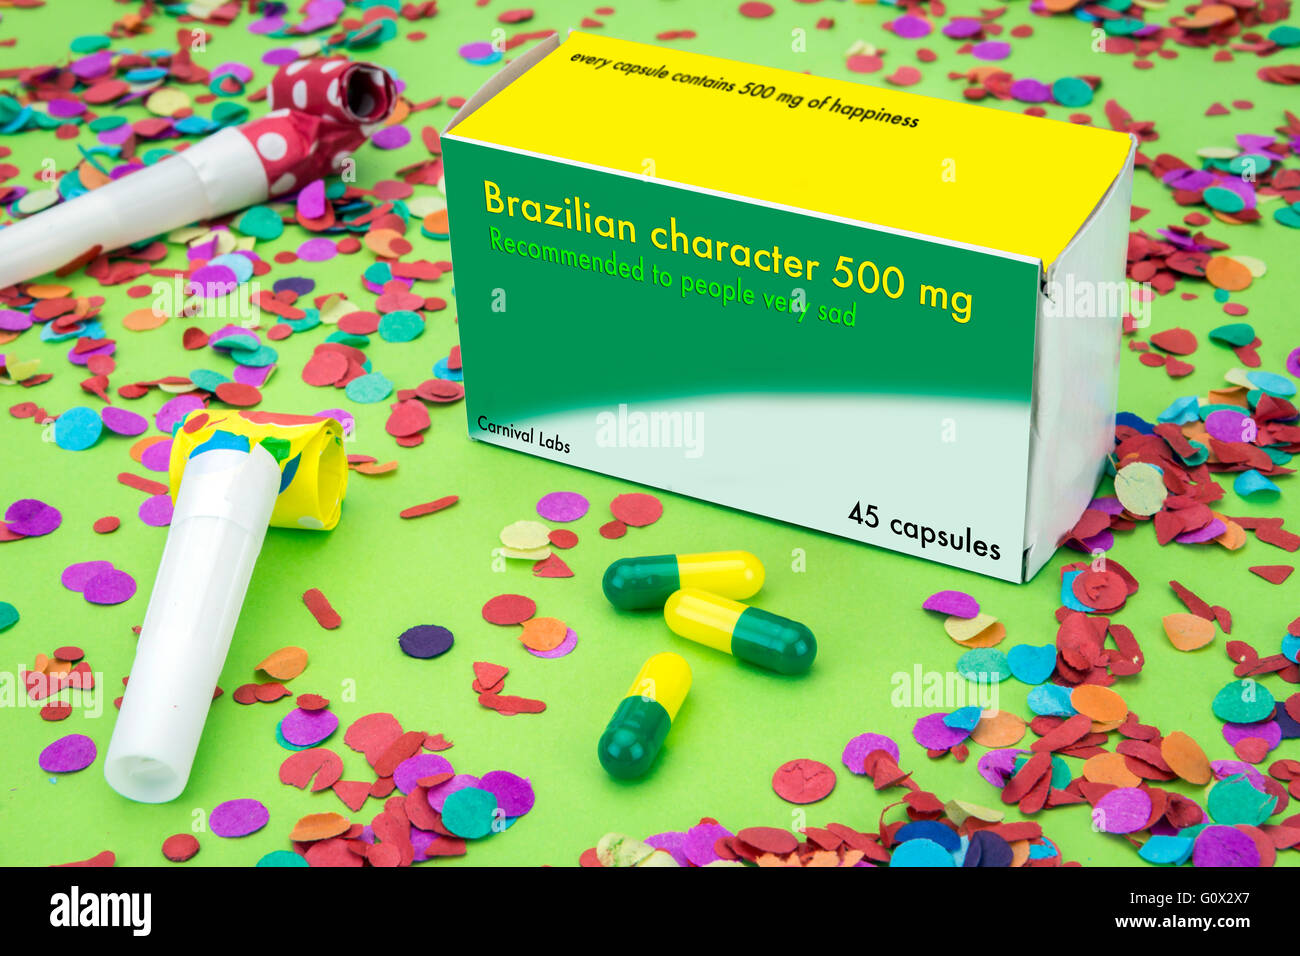 Open medicine packet labelled Brazilian character, it's a medical fake product Stock Photo